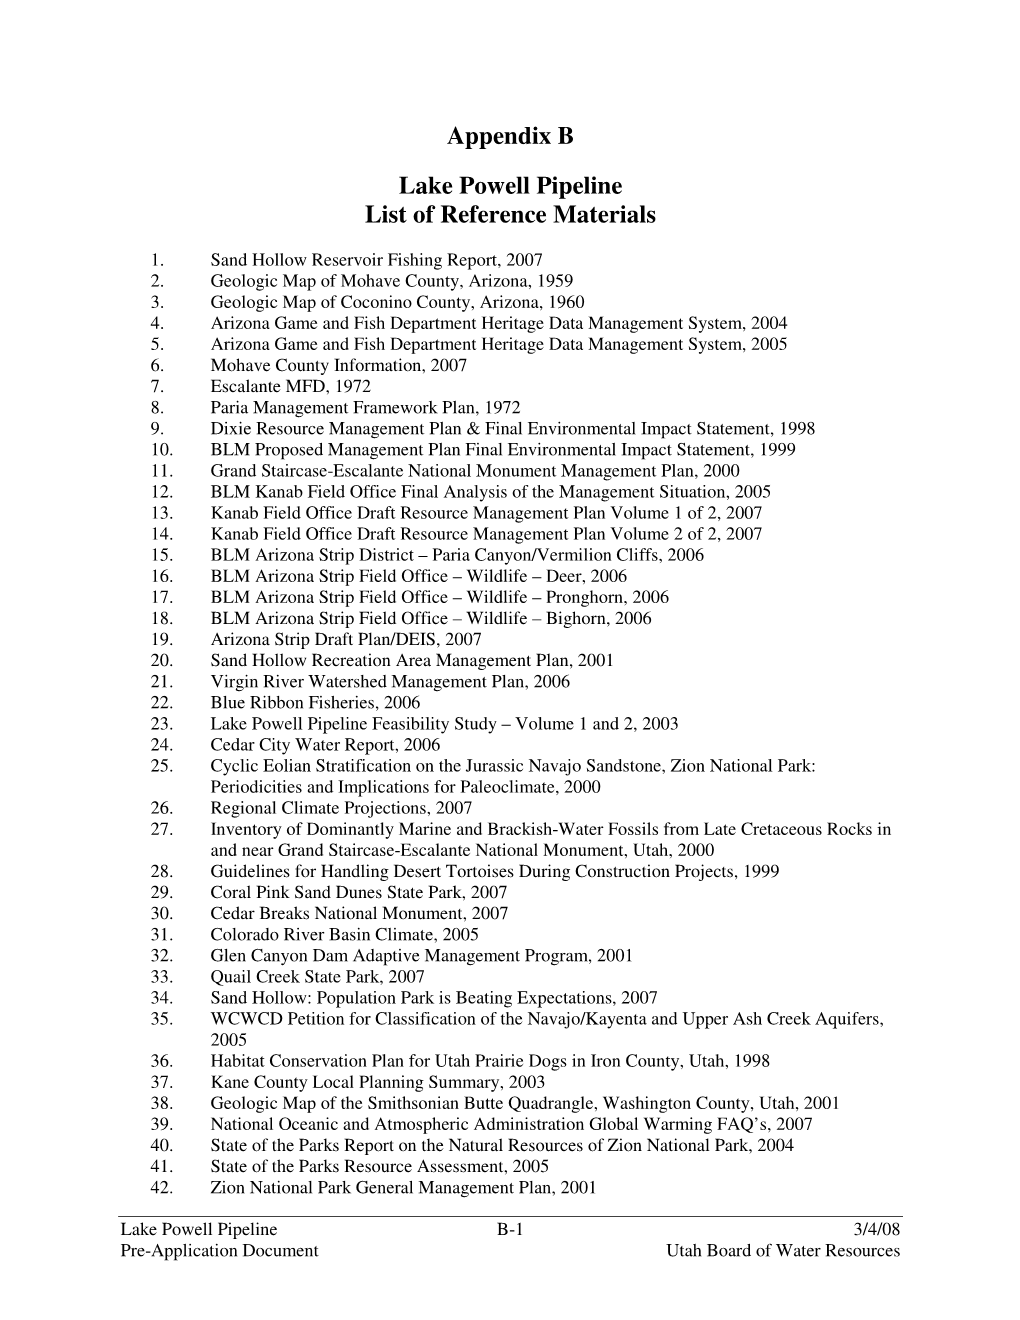 Appendix B Lake Powell Pipeline List of Reference Materials